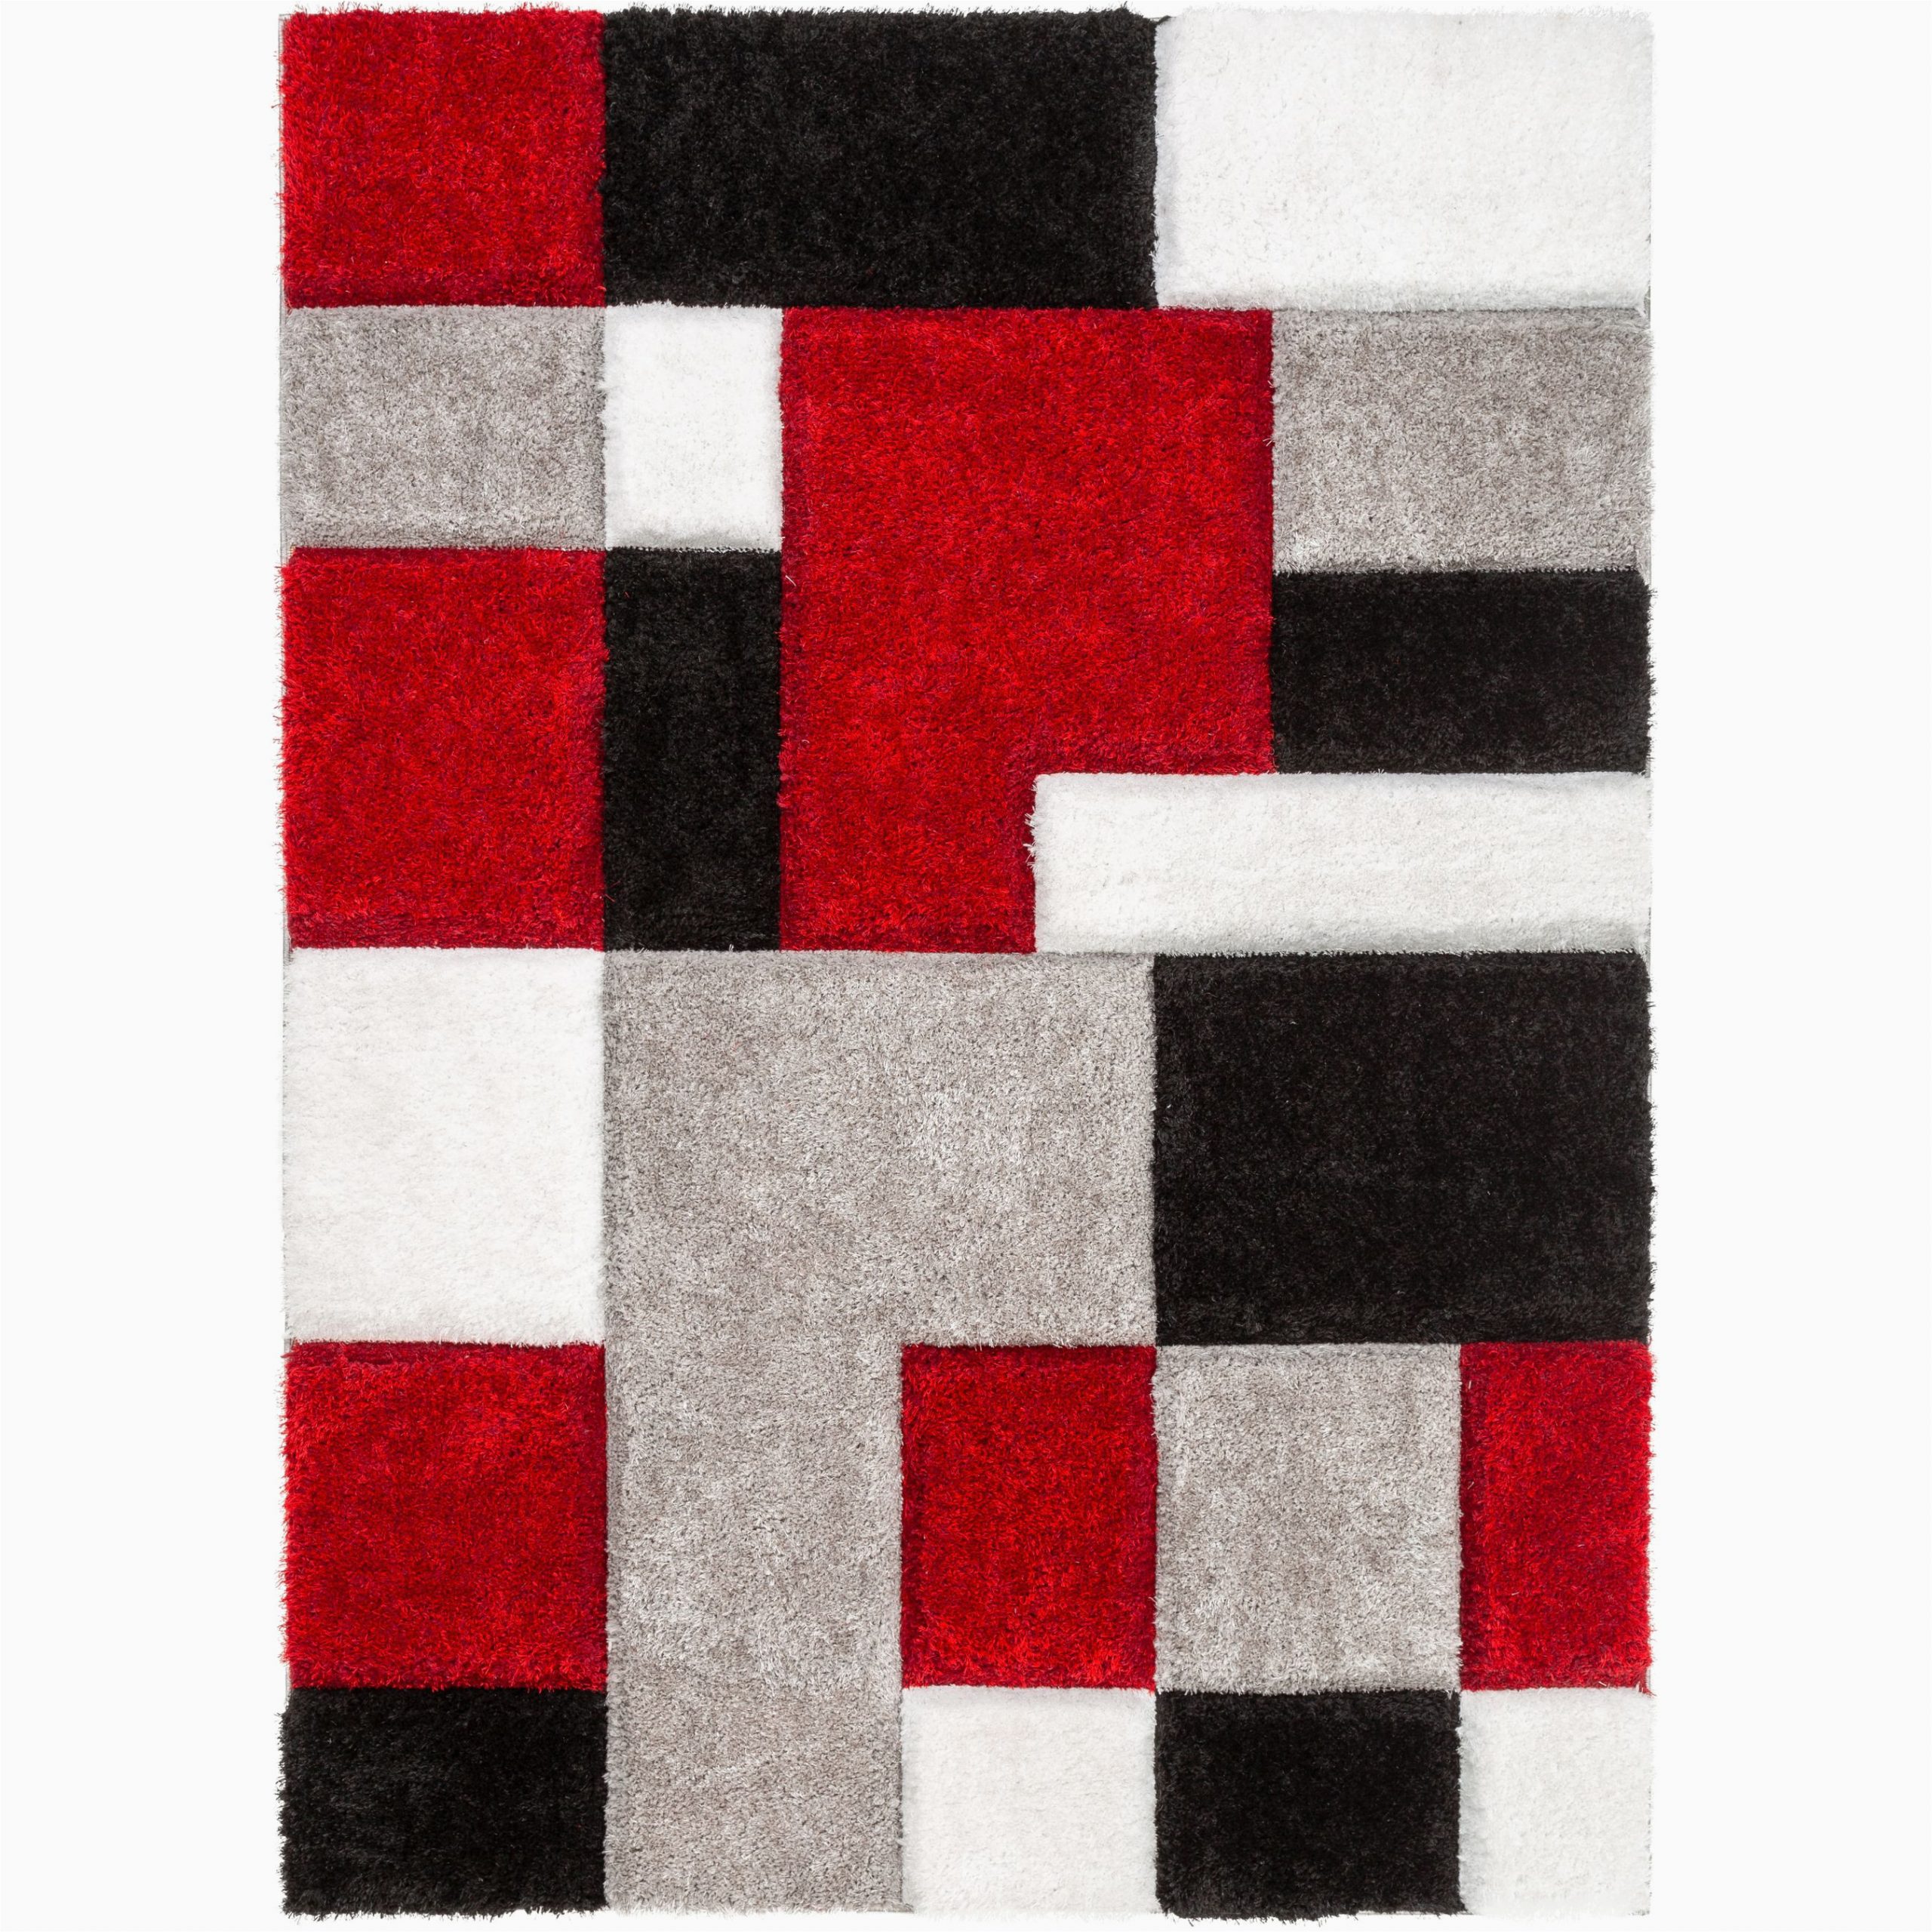 Thick Plush area Rugs 8×10 Well Woven Ella Red Geometric Boxes Thick soft Plush 3d